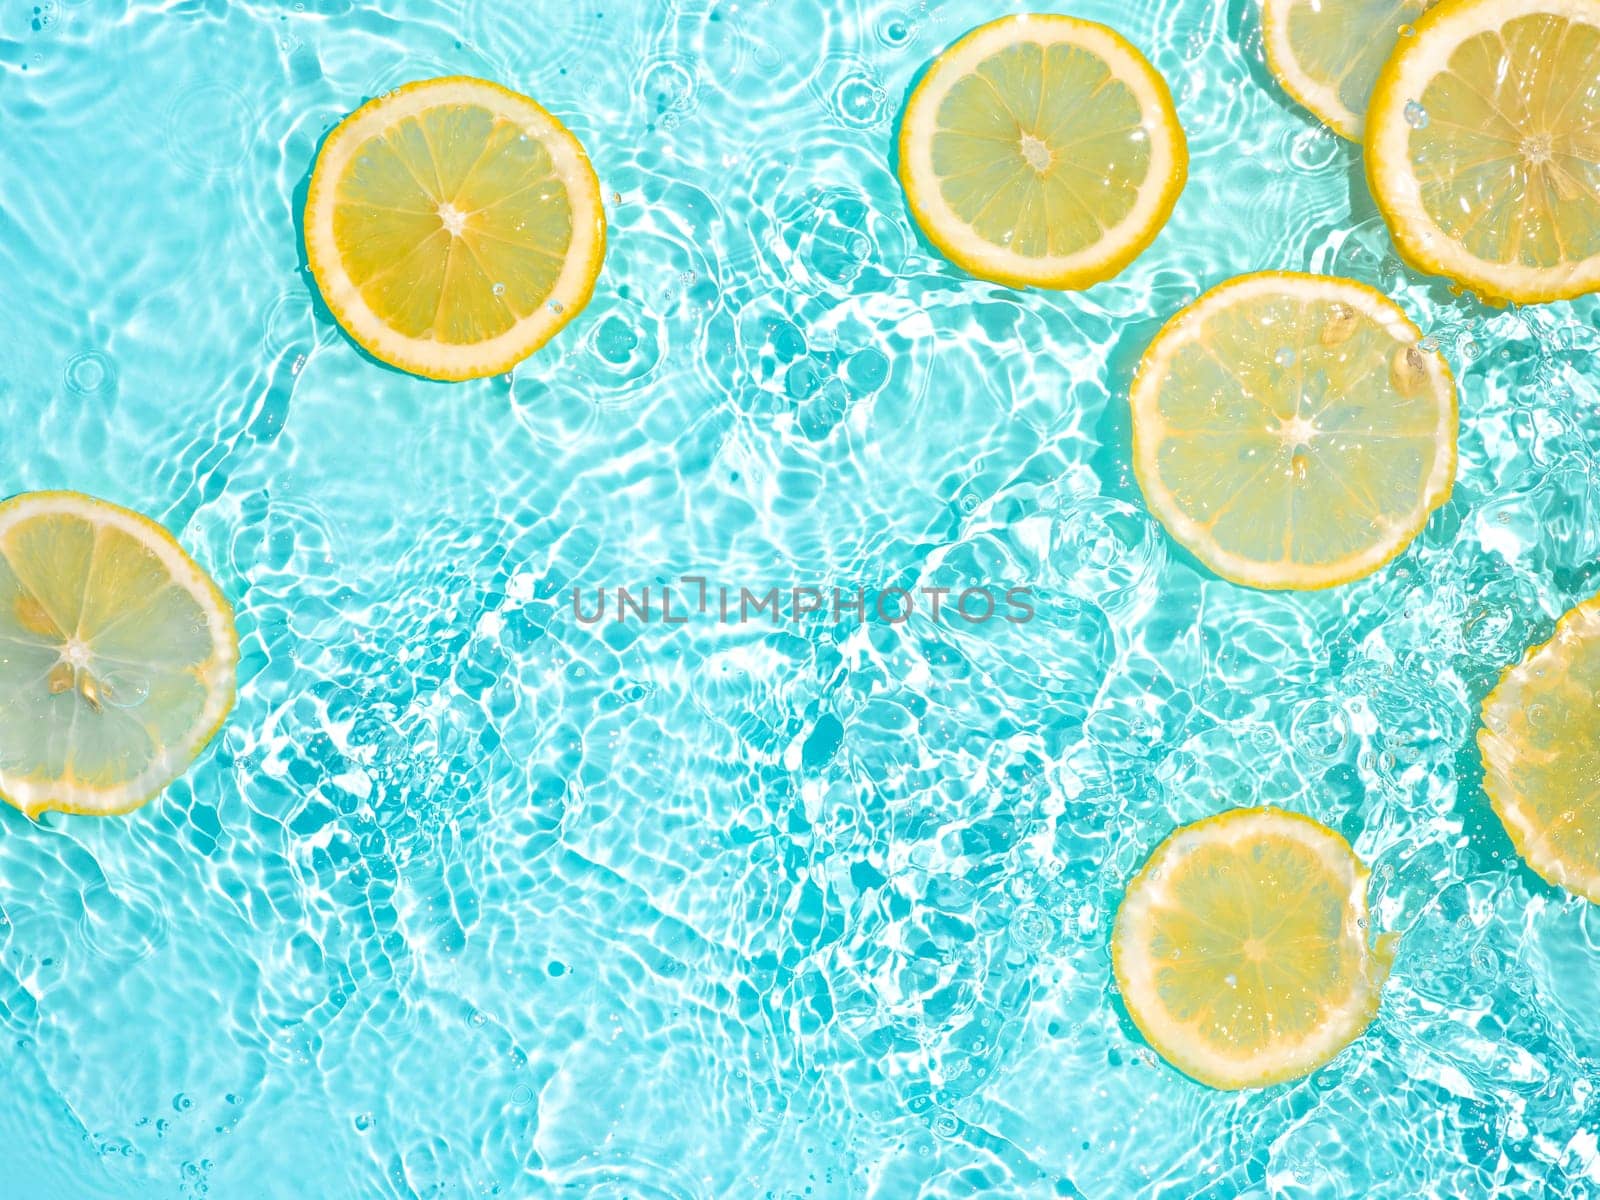 Lemon slices in clean transparent water over blue background with copy space. Water splashing on blue water surface in sunlight. Top view or flatlay. Summer, vacation, healthy eating concept